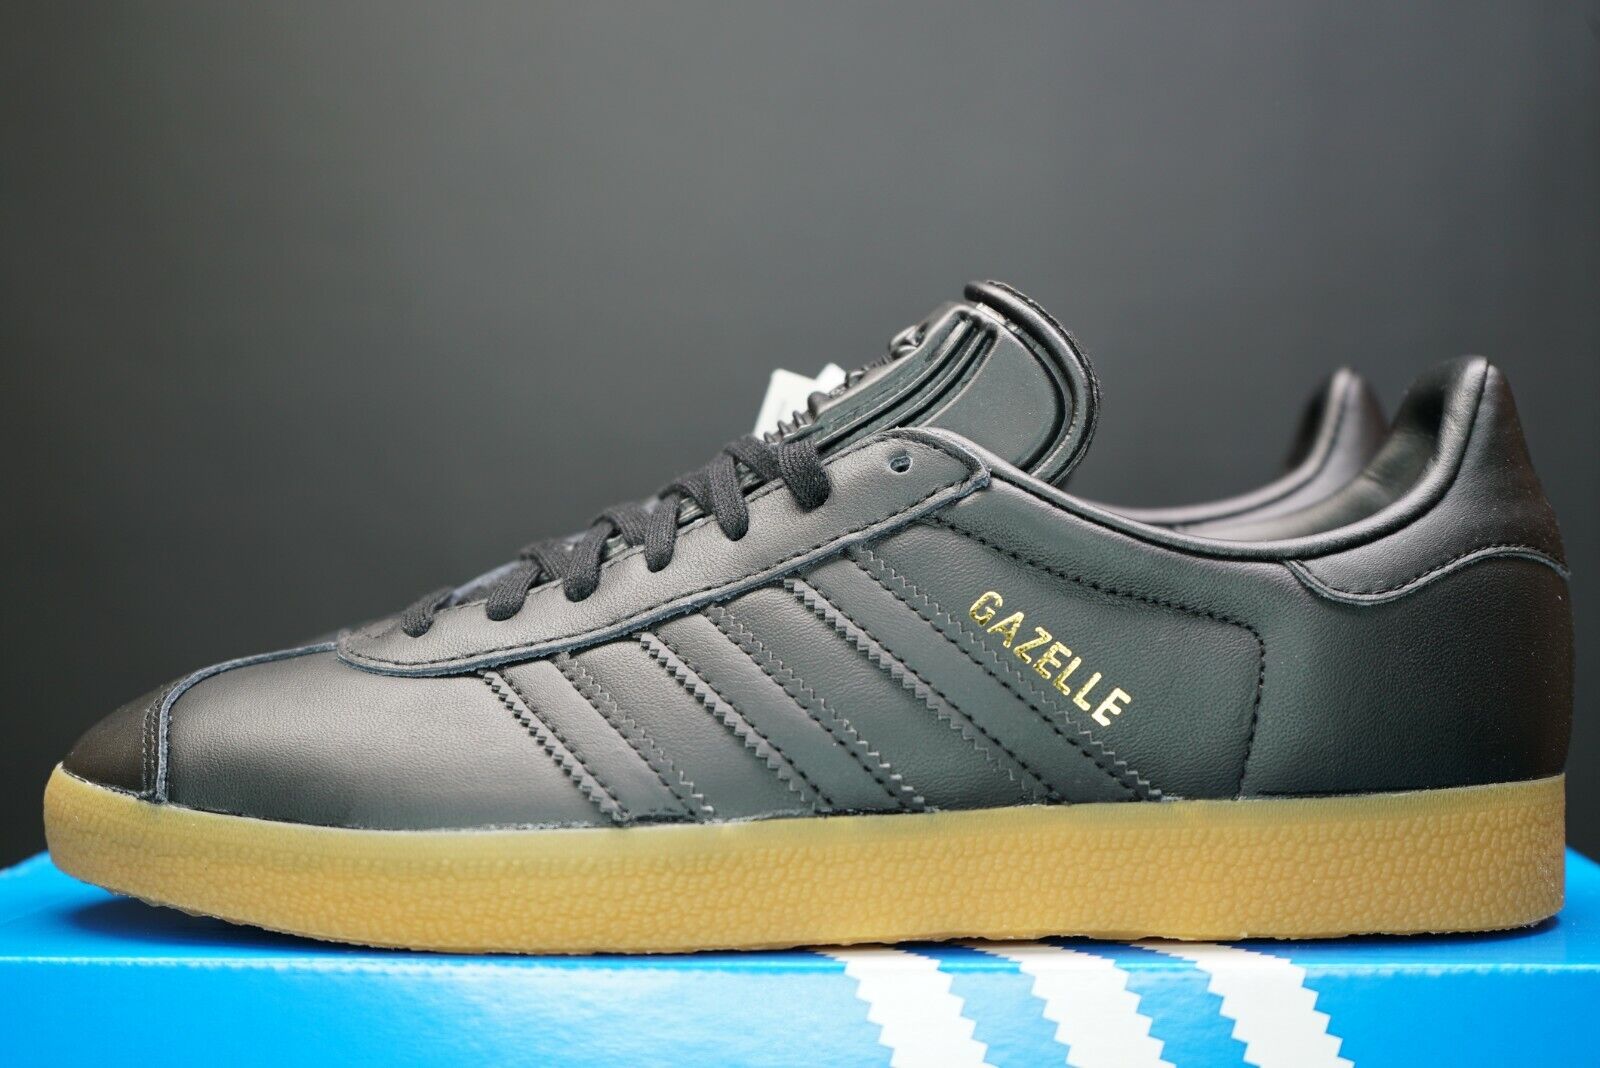 Adidas Gazelle Black Gum Trainers New DS Sneakers Shoes Sizes | eBay